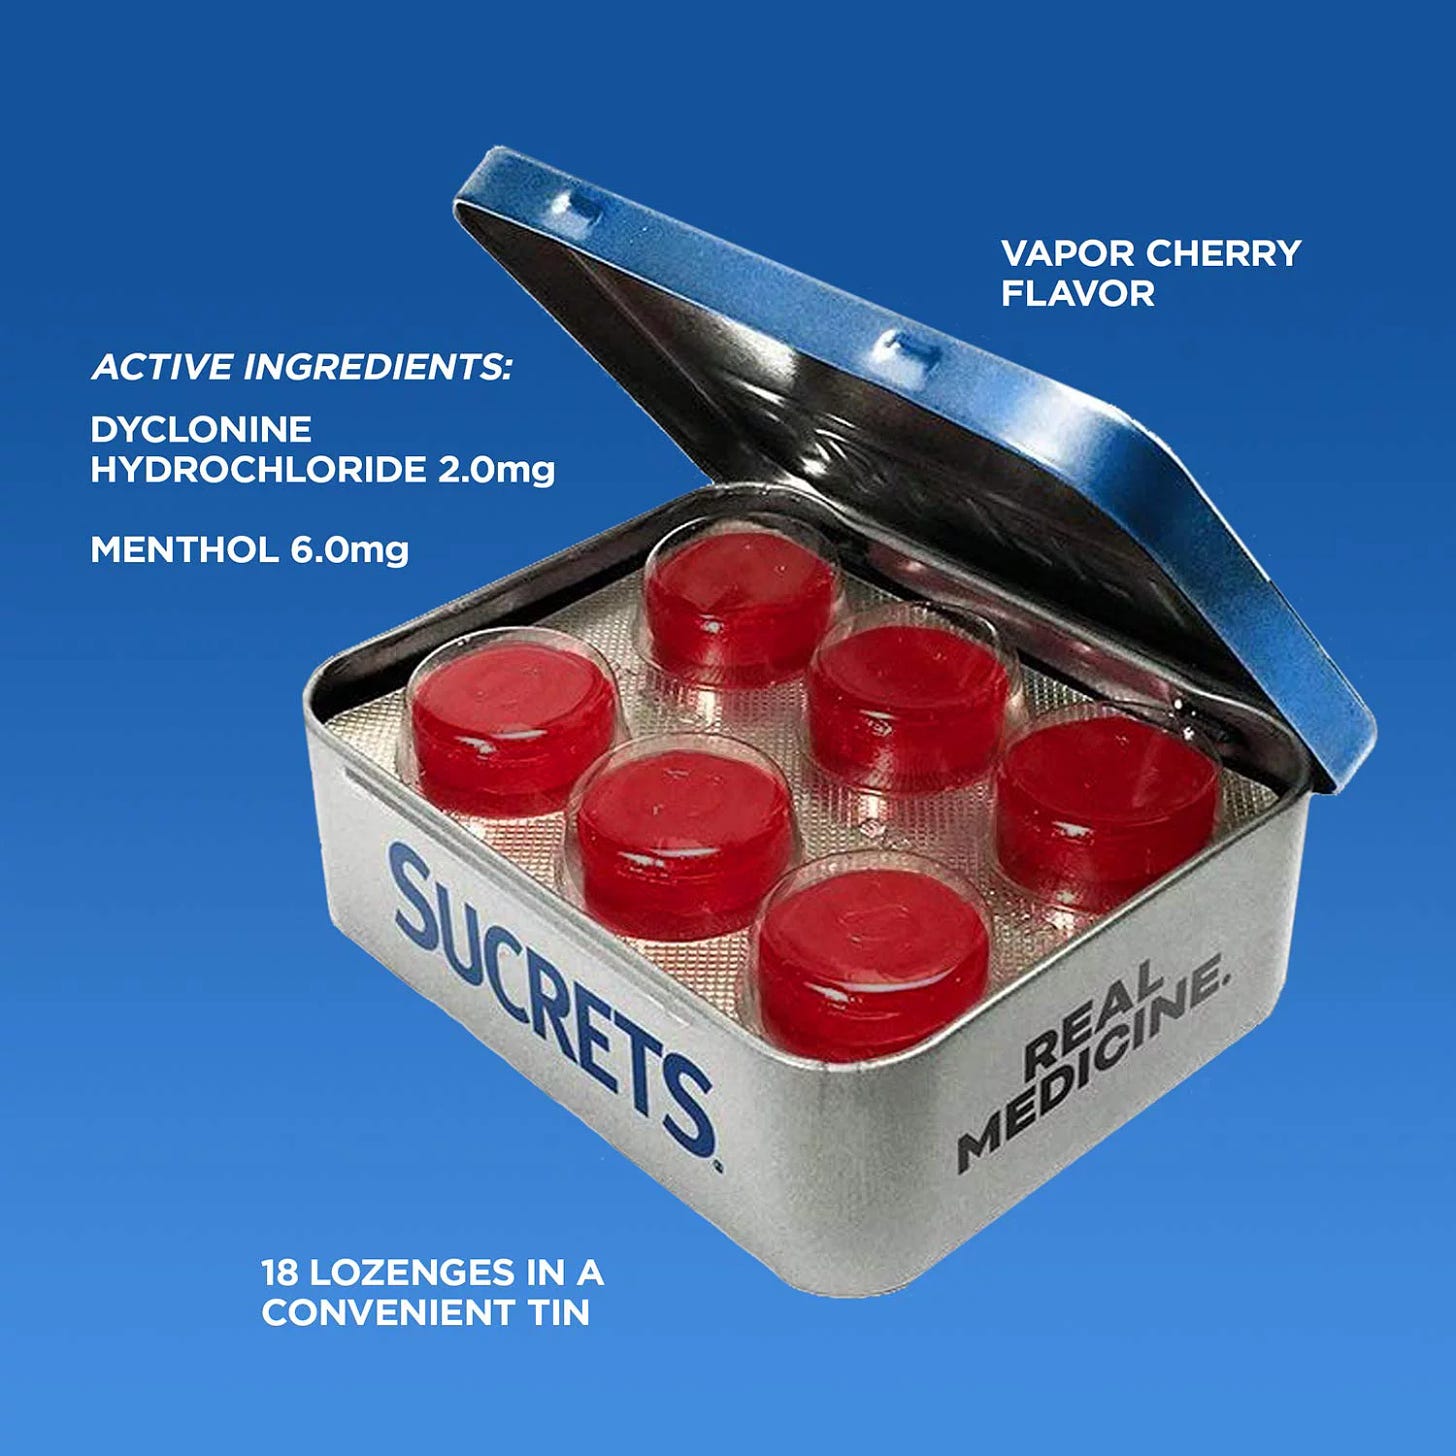 An ad for Sucrets. They're in a blister pack in a metal tin. The ad says their flavor is "VAPOR CHERRY FLAVOR" and mentions the active ingredients of dyclonine hydrochloride and menthol.